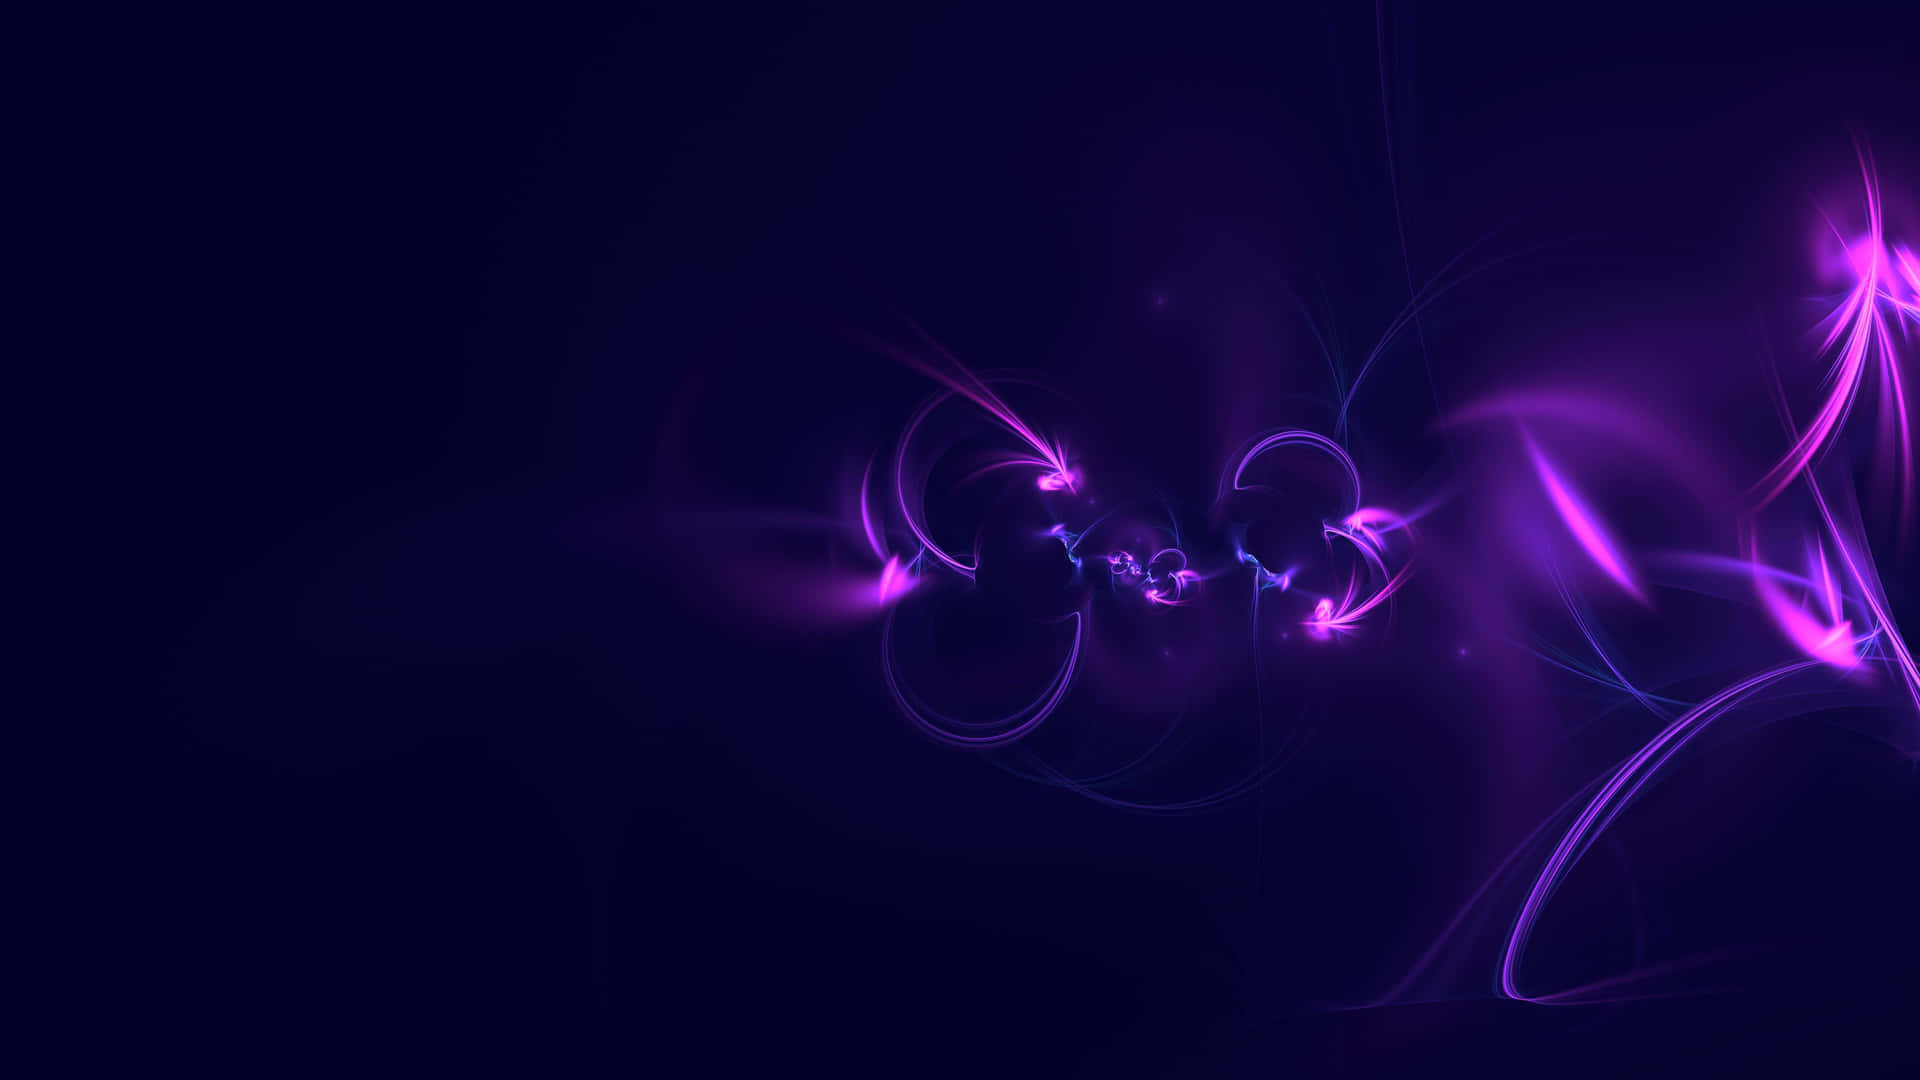 Vibrant Blue and Purple Background